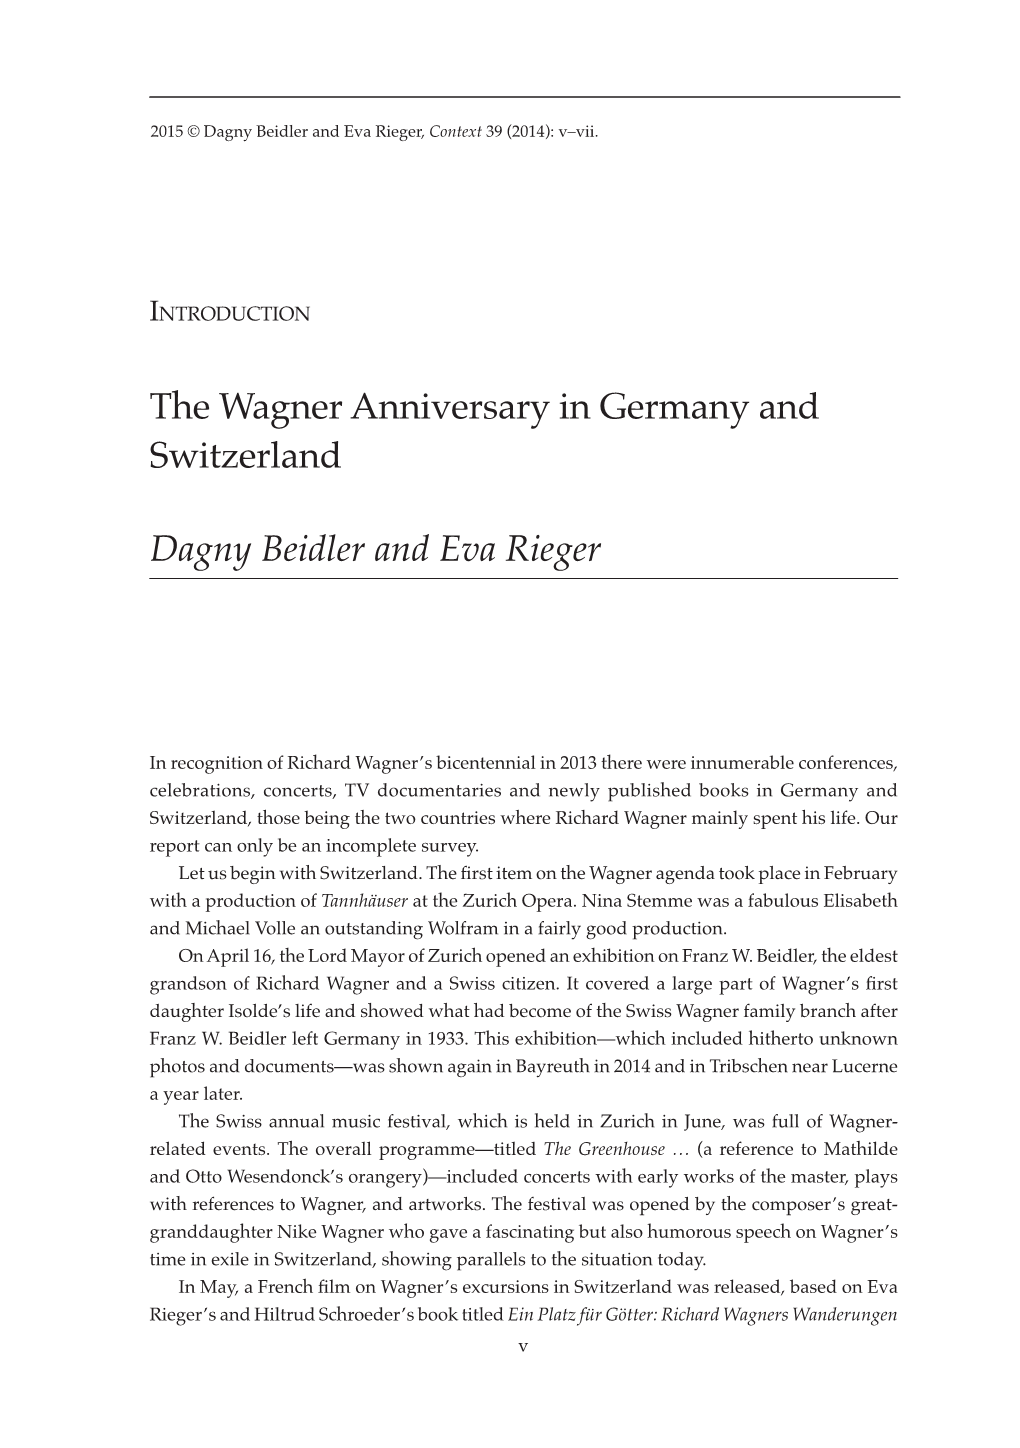 The Wagner Anniversary in Germany and Switzerland Dagny Beidler and Eva Rieger